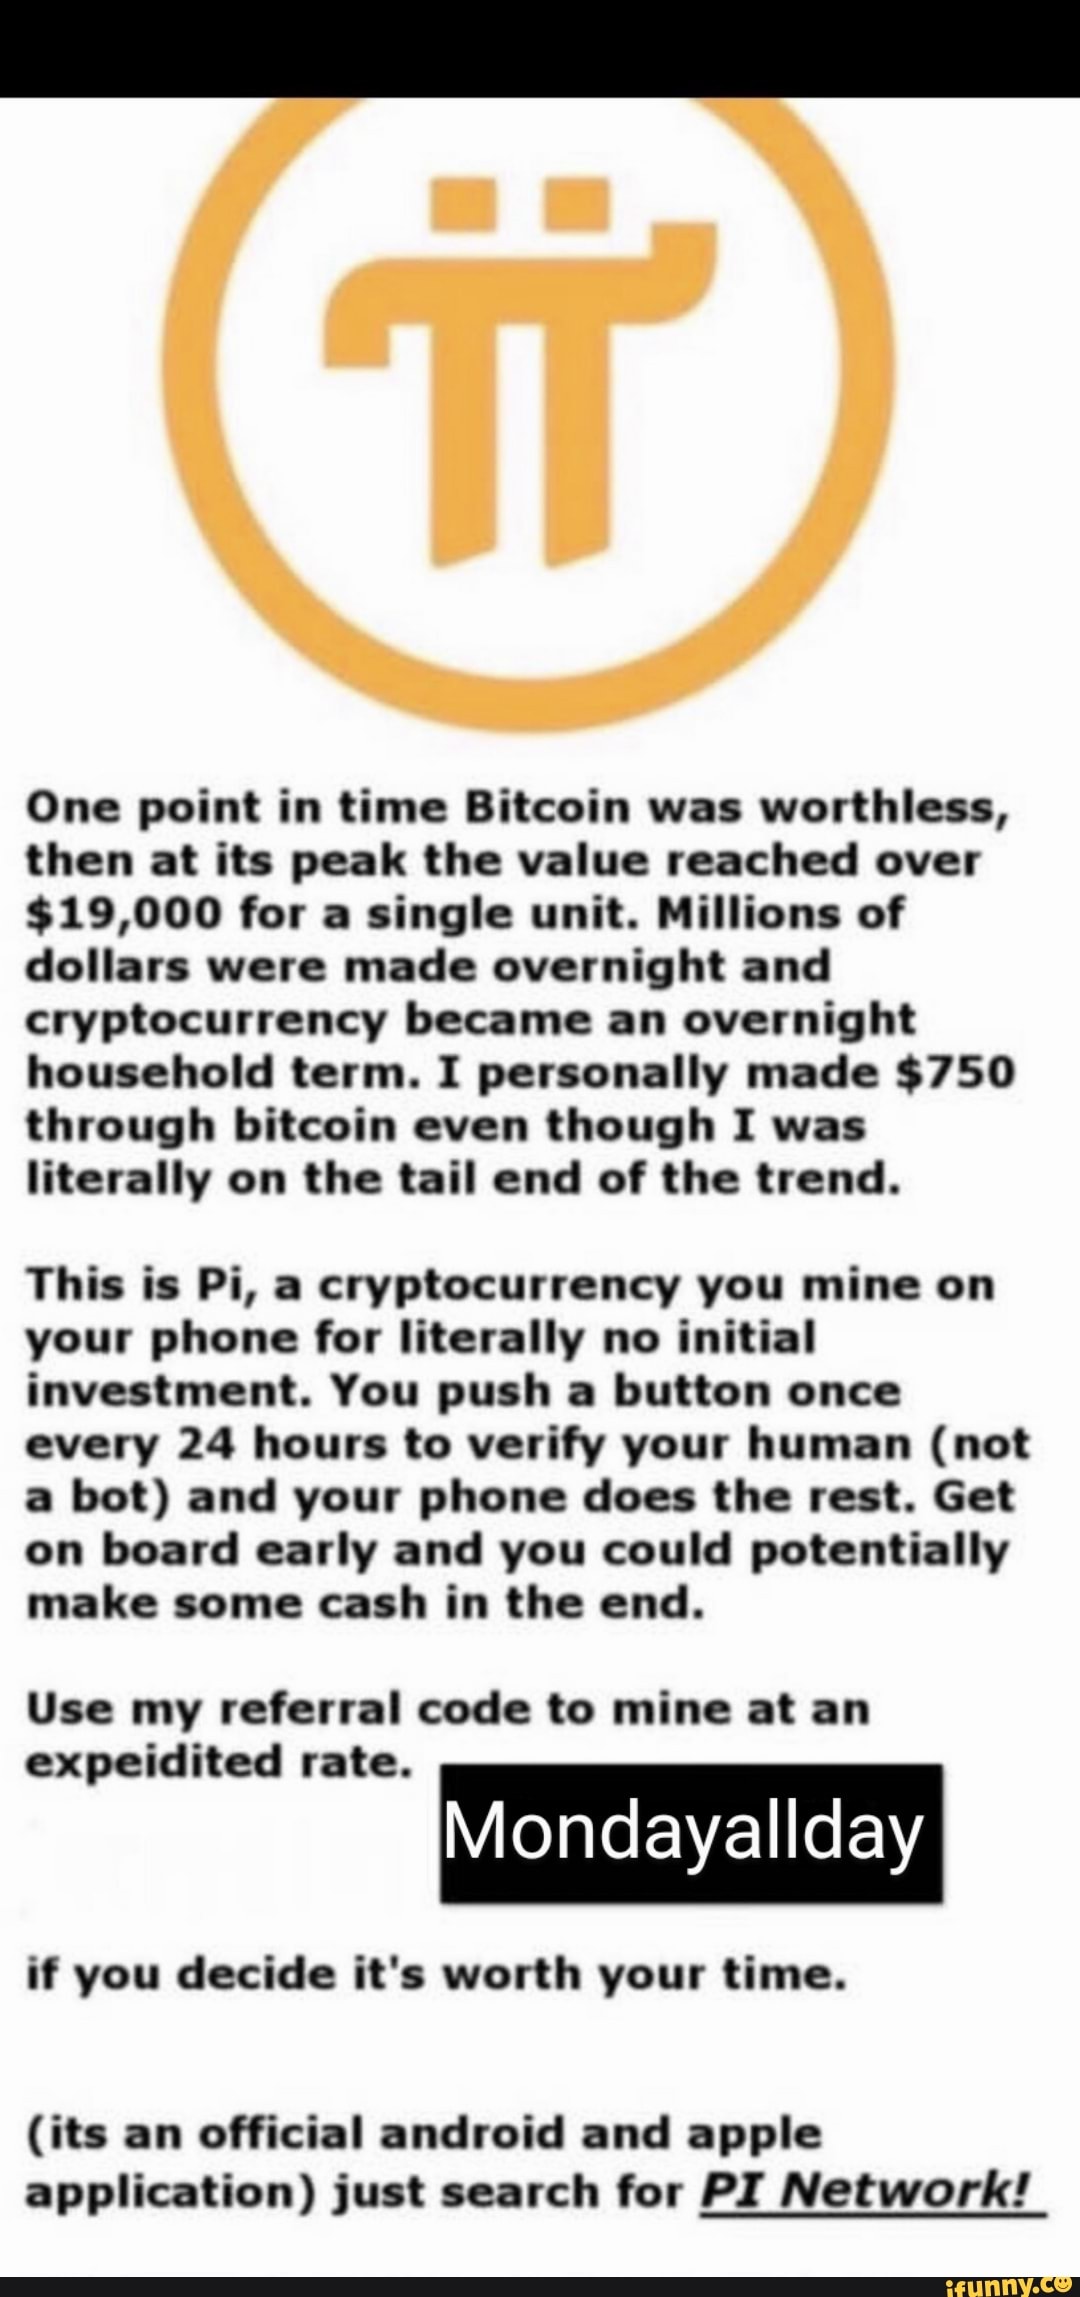 One point in time Bitcoin was worthless, then at its peak ...